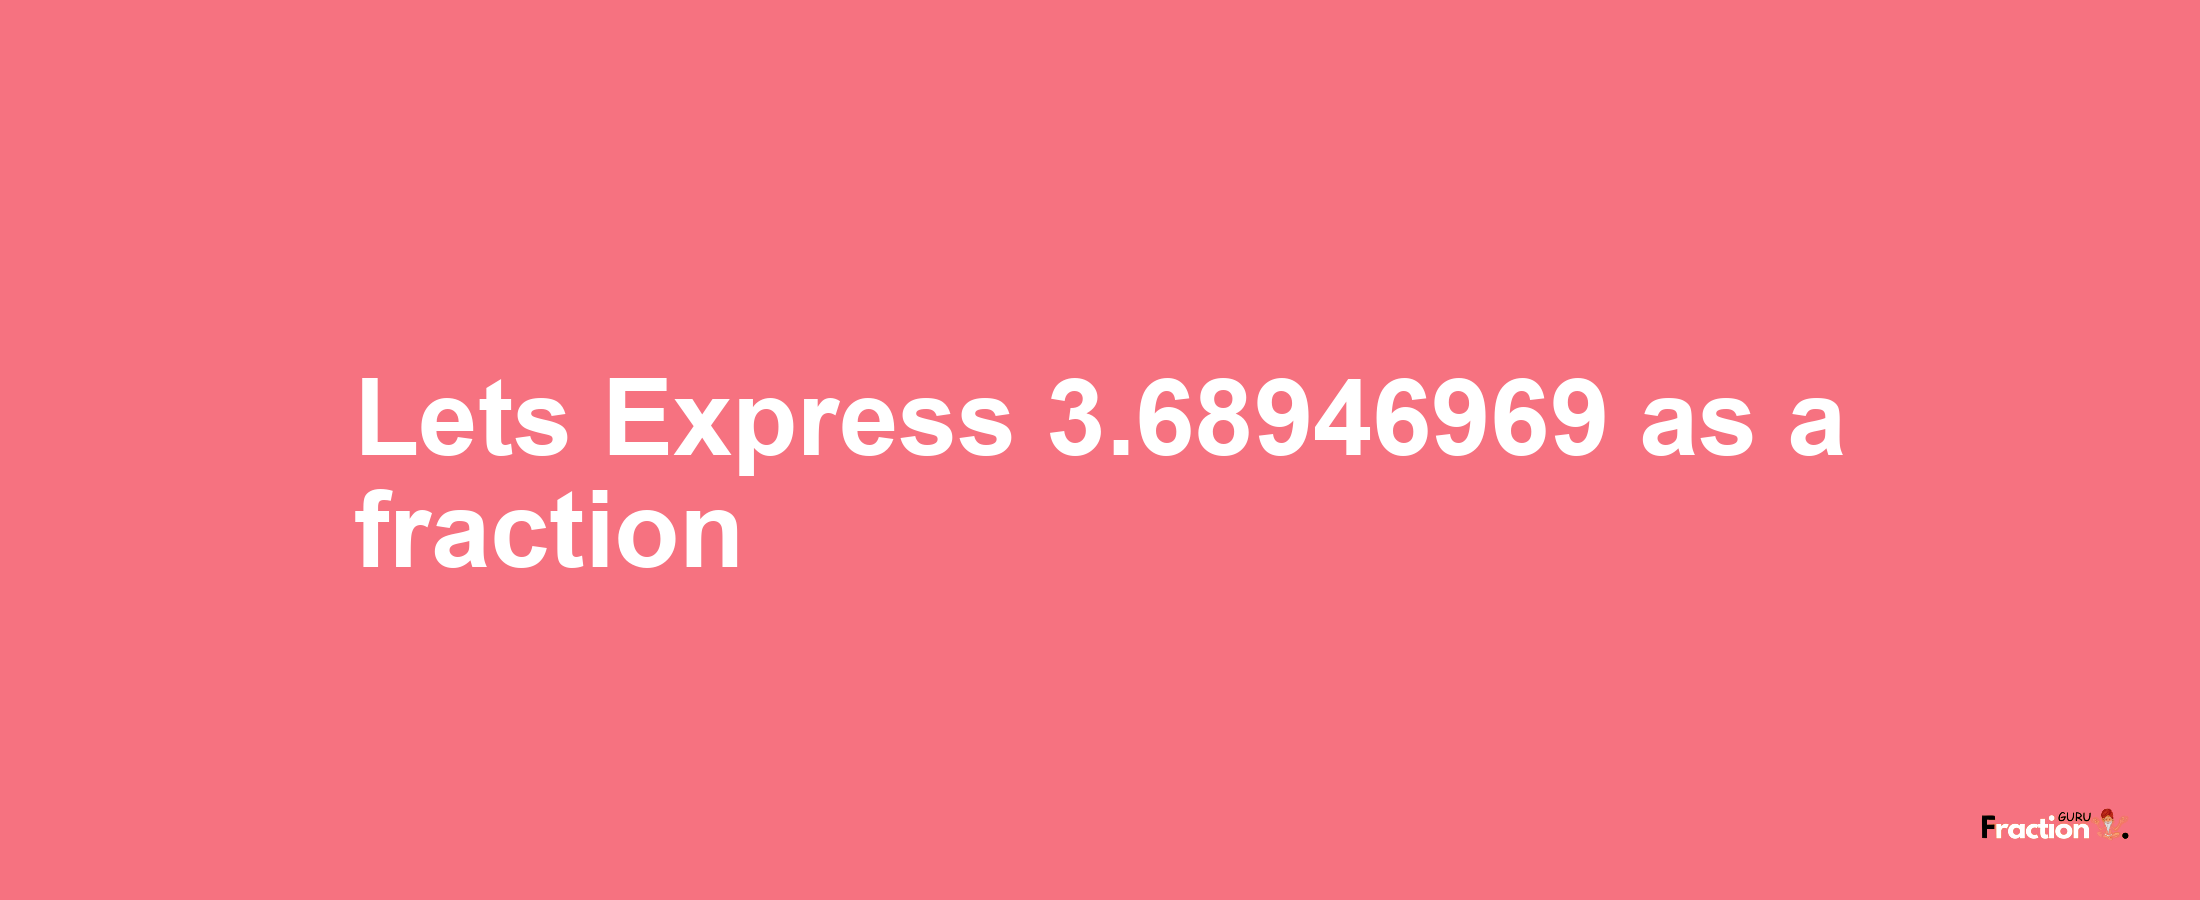 Lets Express 3.68946969 as afraction